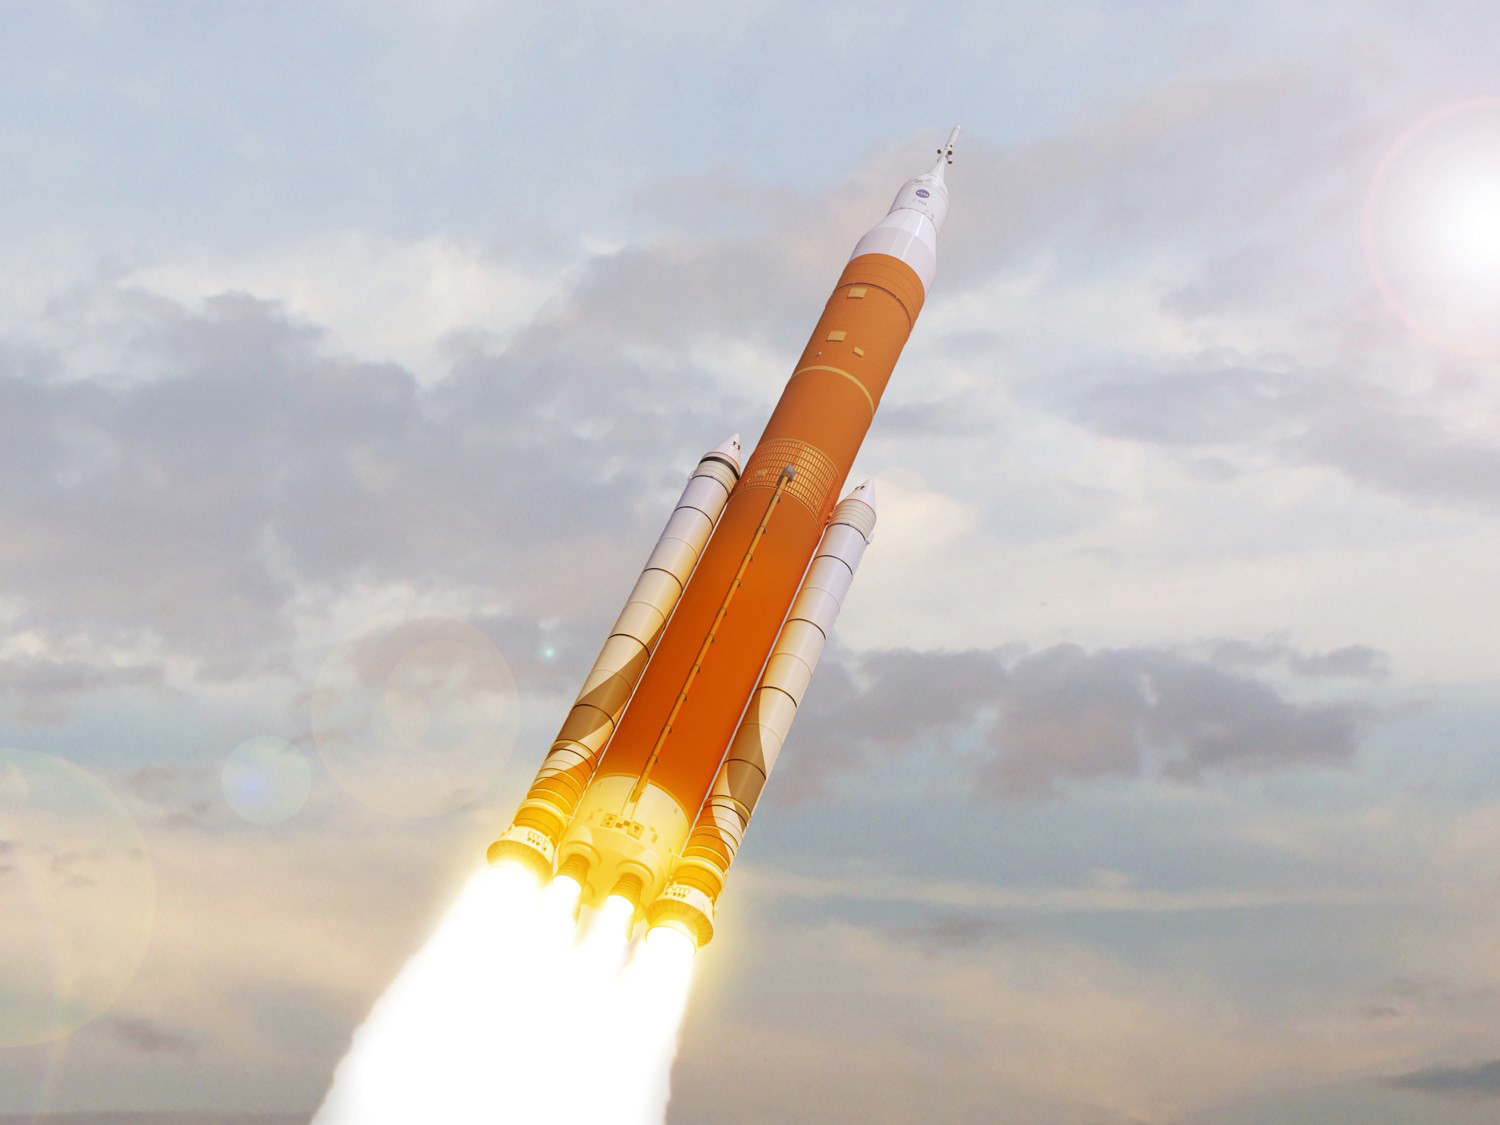 The Orion spacecraft is the next generation of deep space vehicle being built by NASA